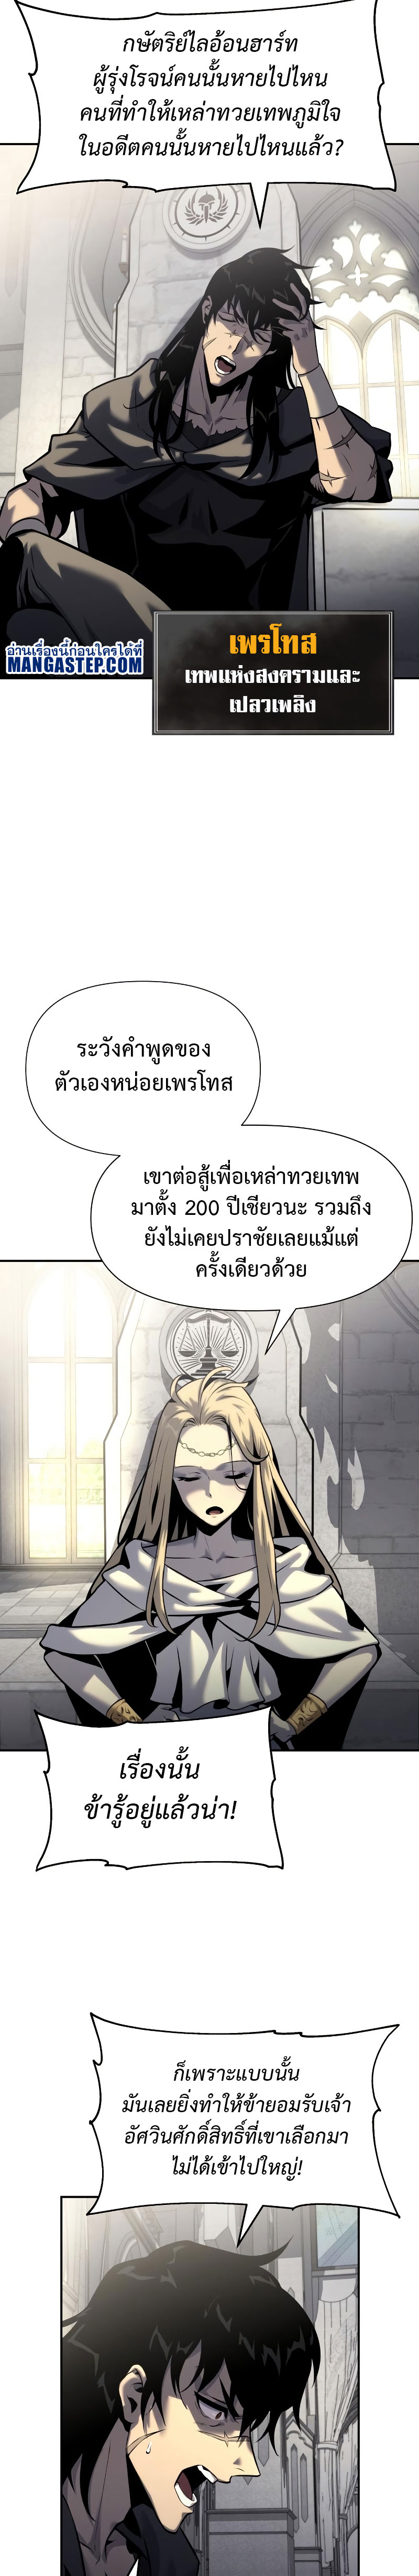 The Knight King 17 (12)